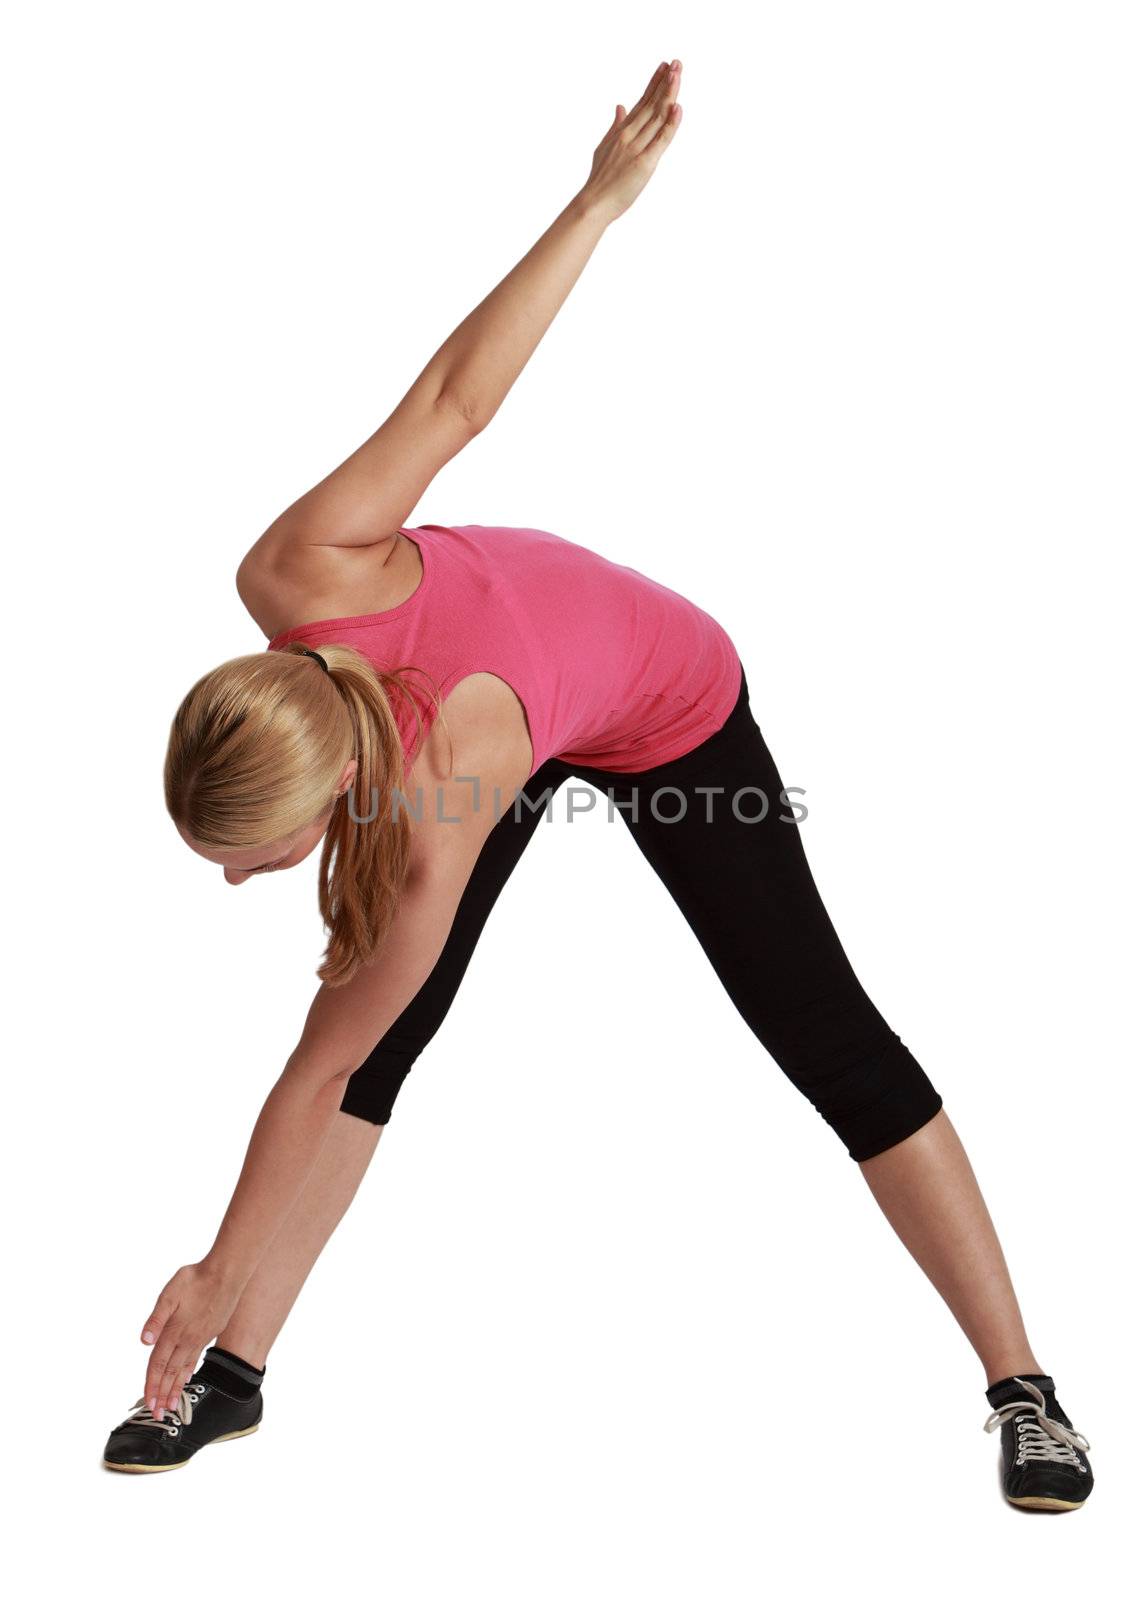 Blond woman standing with legs apart bending down with one hand touching one foot and the other raised up, against a white background.